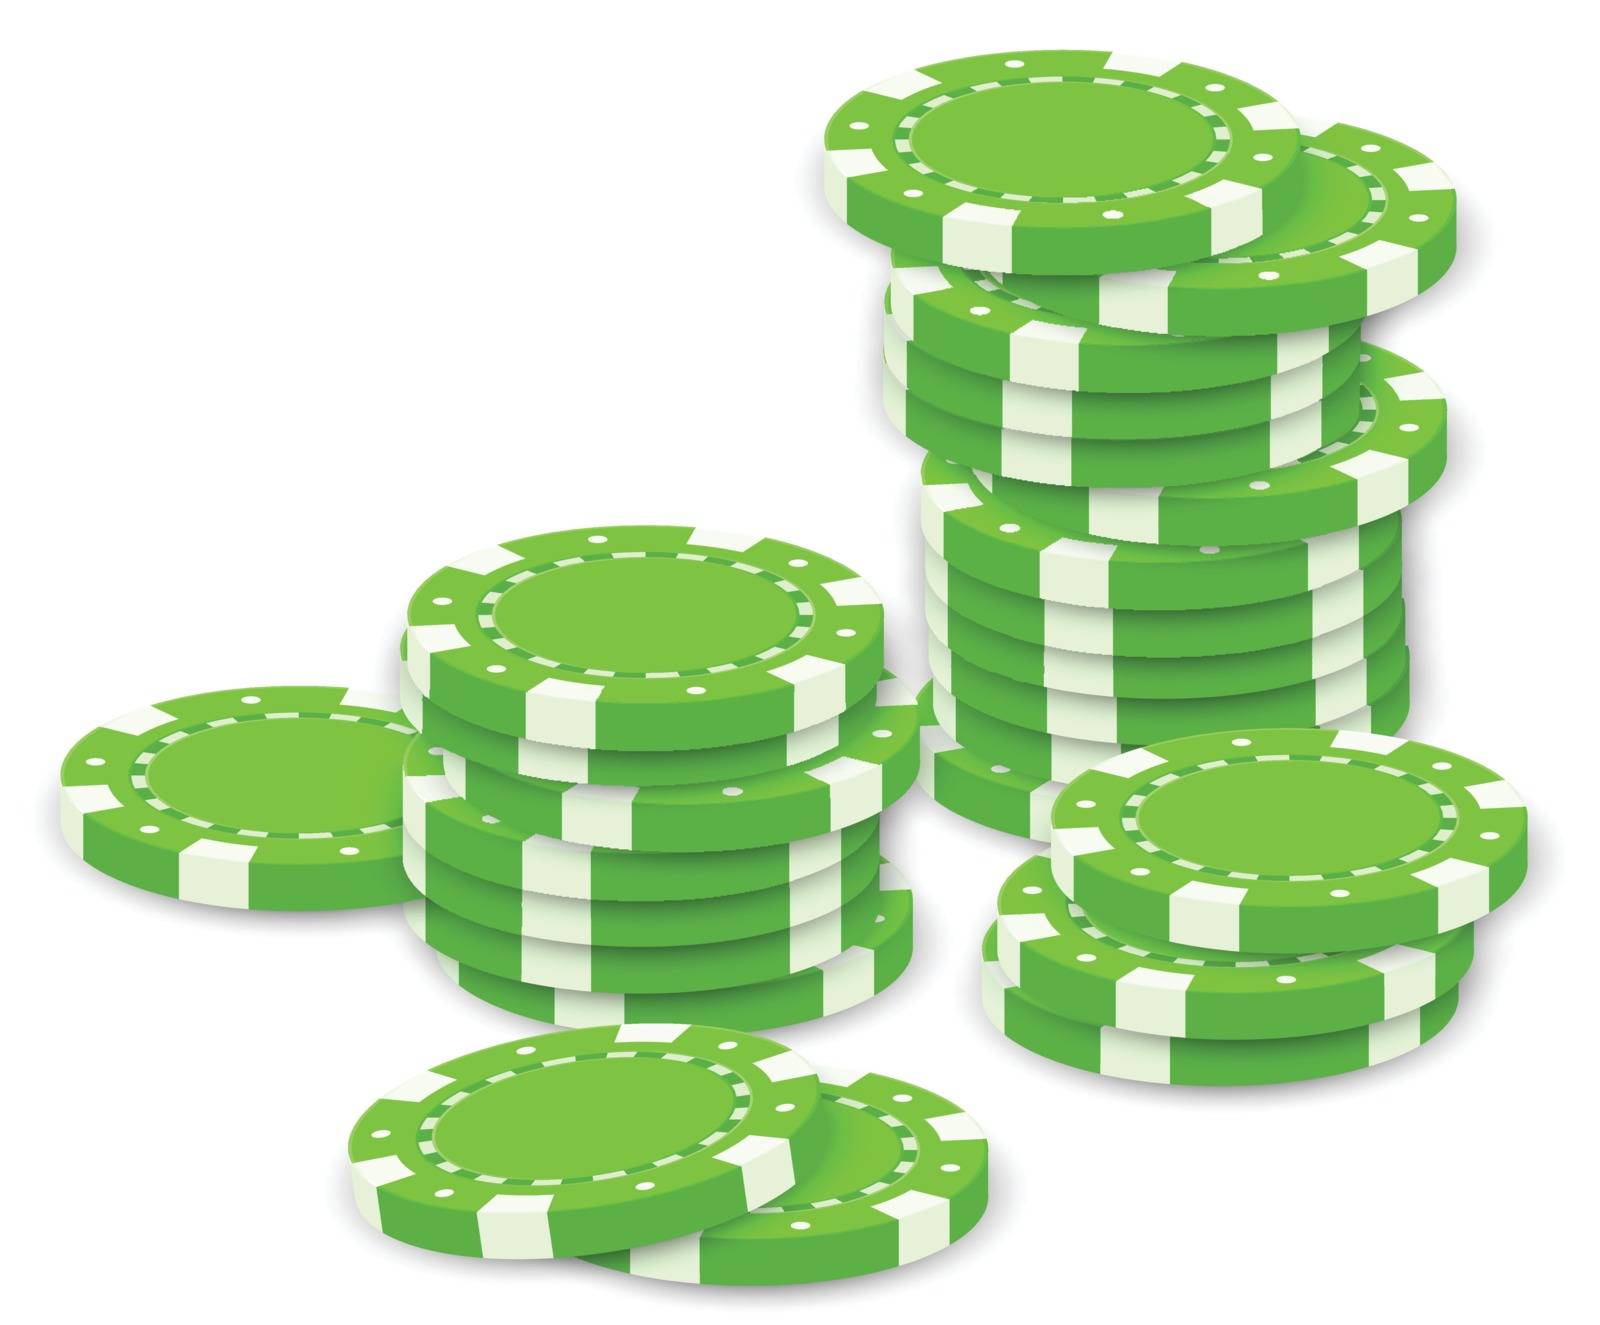 Illustration of the green poker chips on a white background